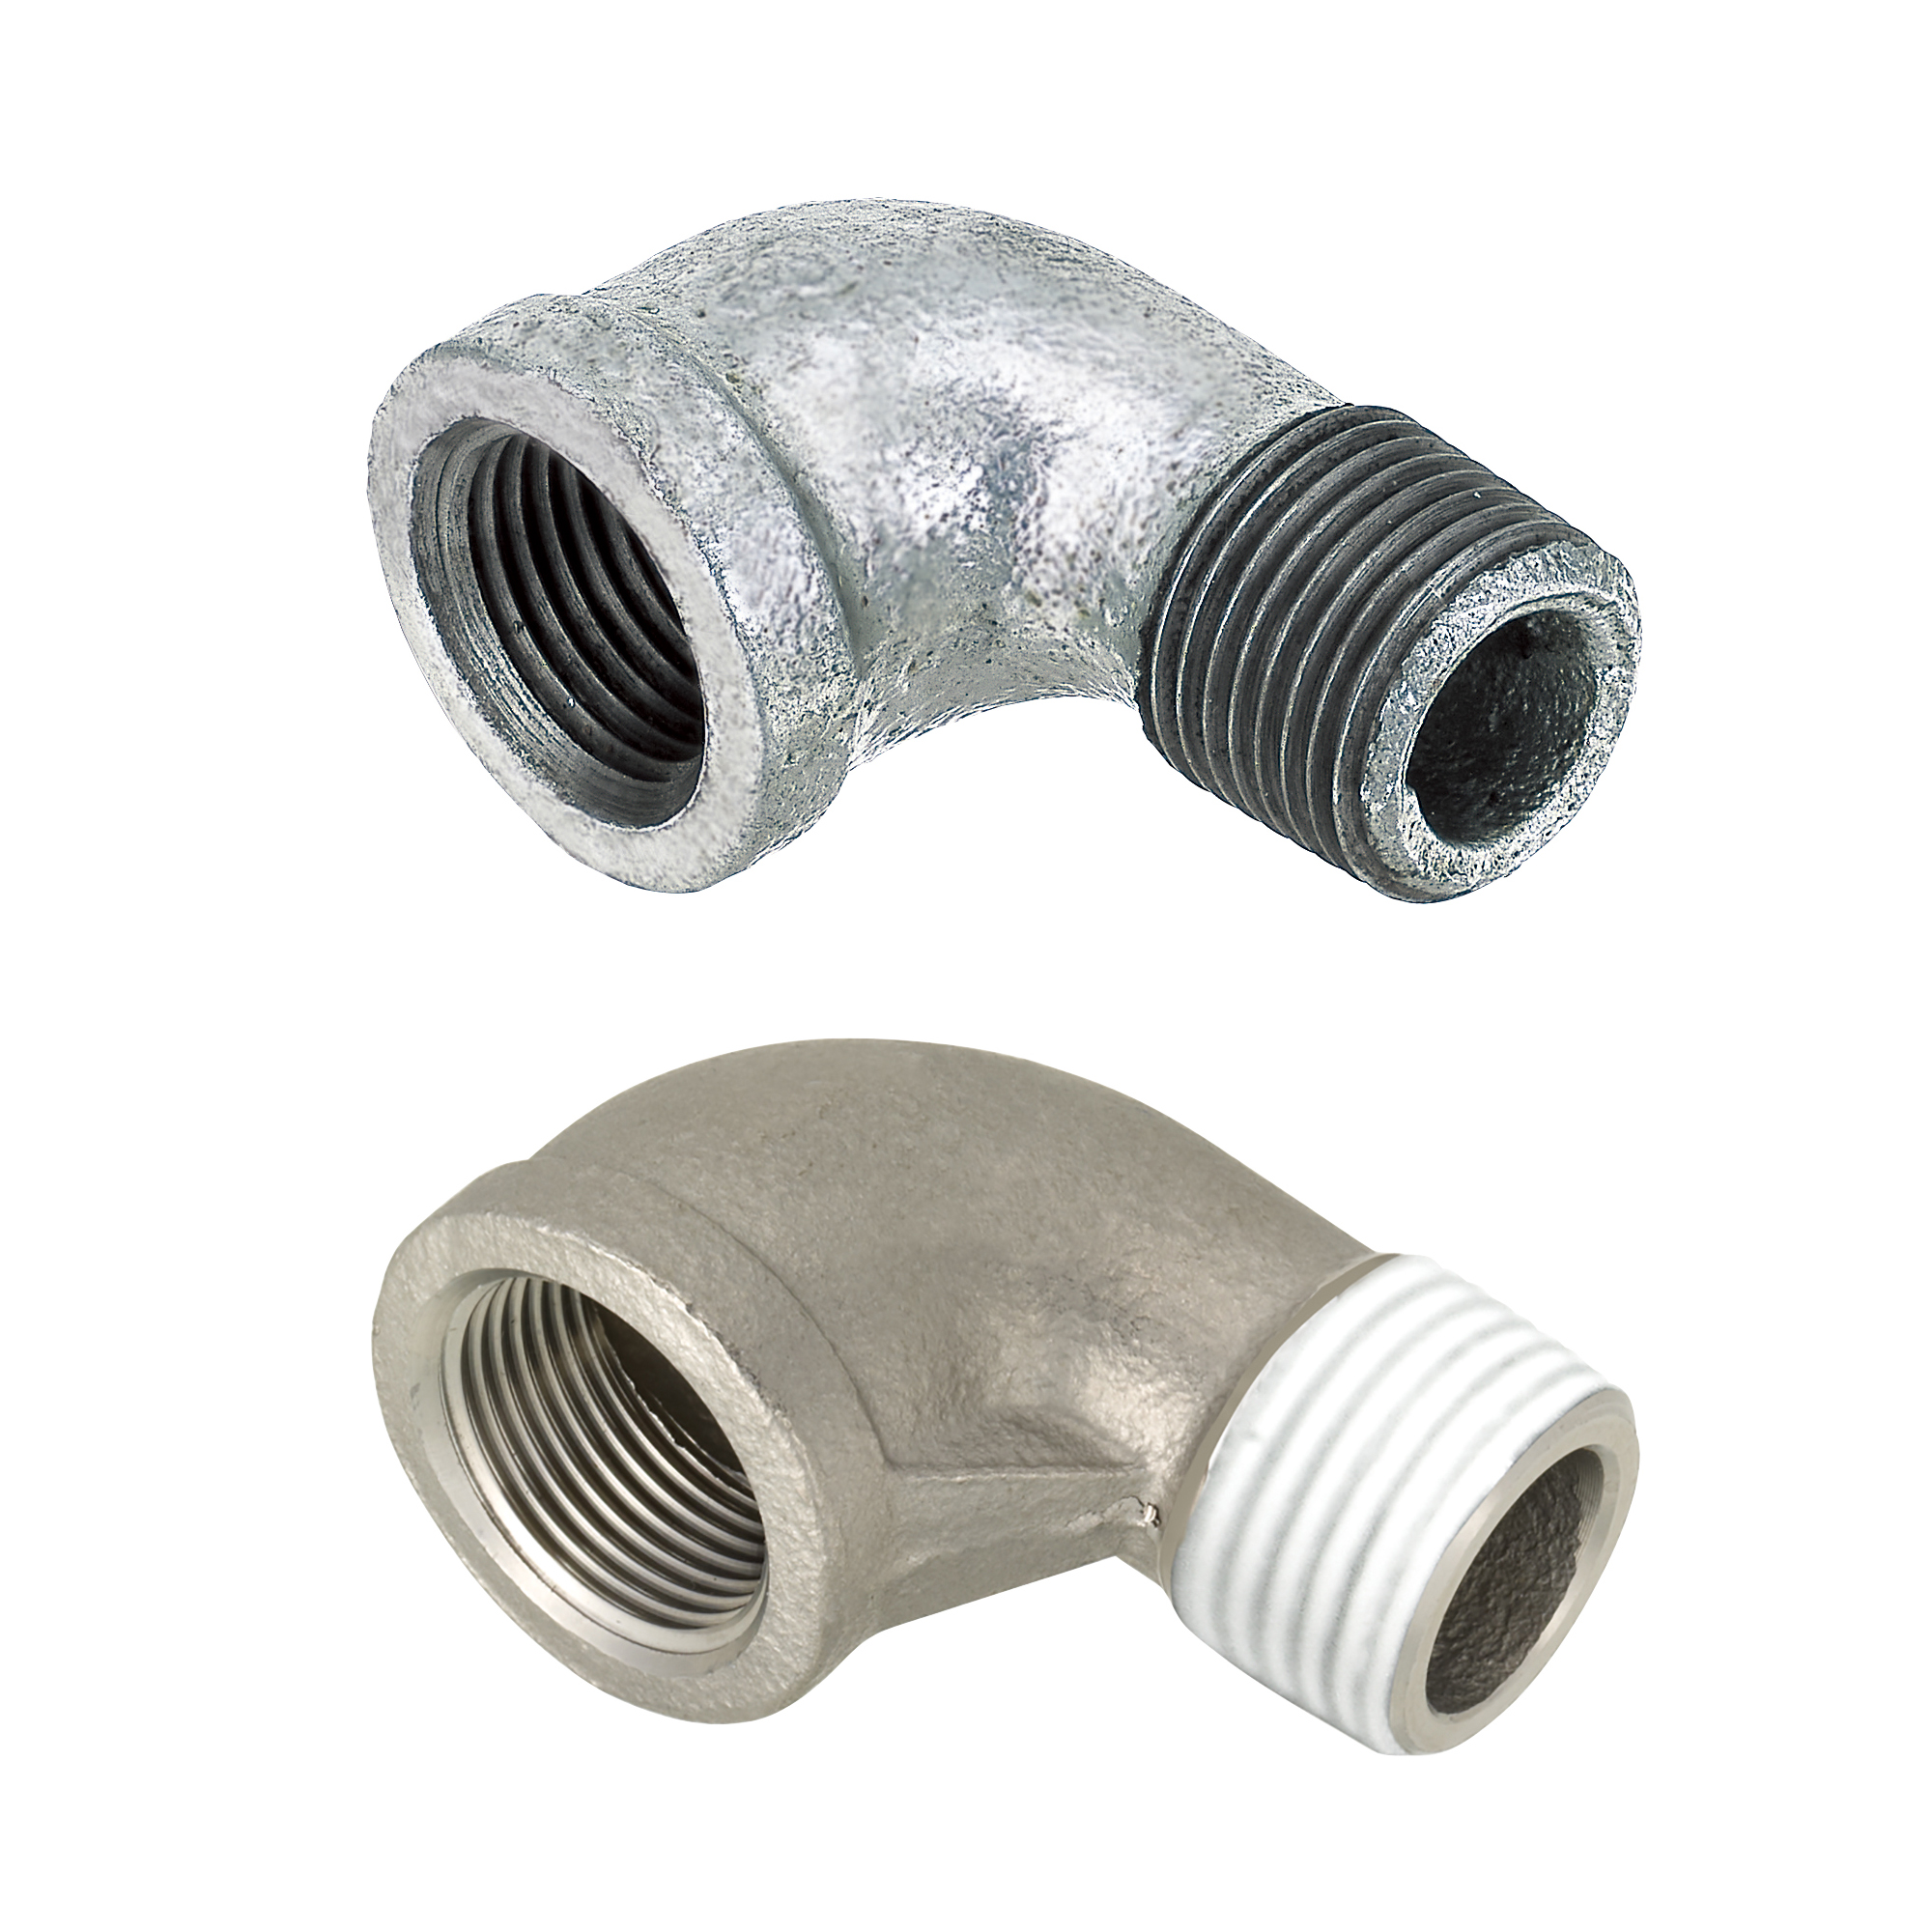 Low Pressure Fittings/90 Deg. Elbow/Threaded and Tapped SUTPEL6A